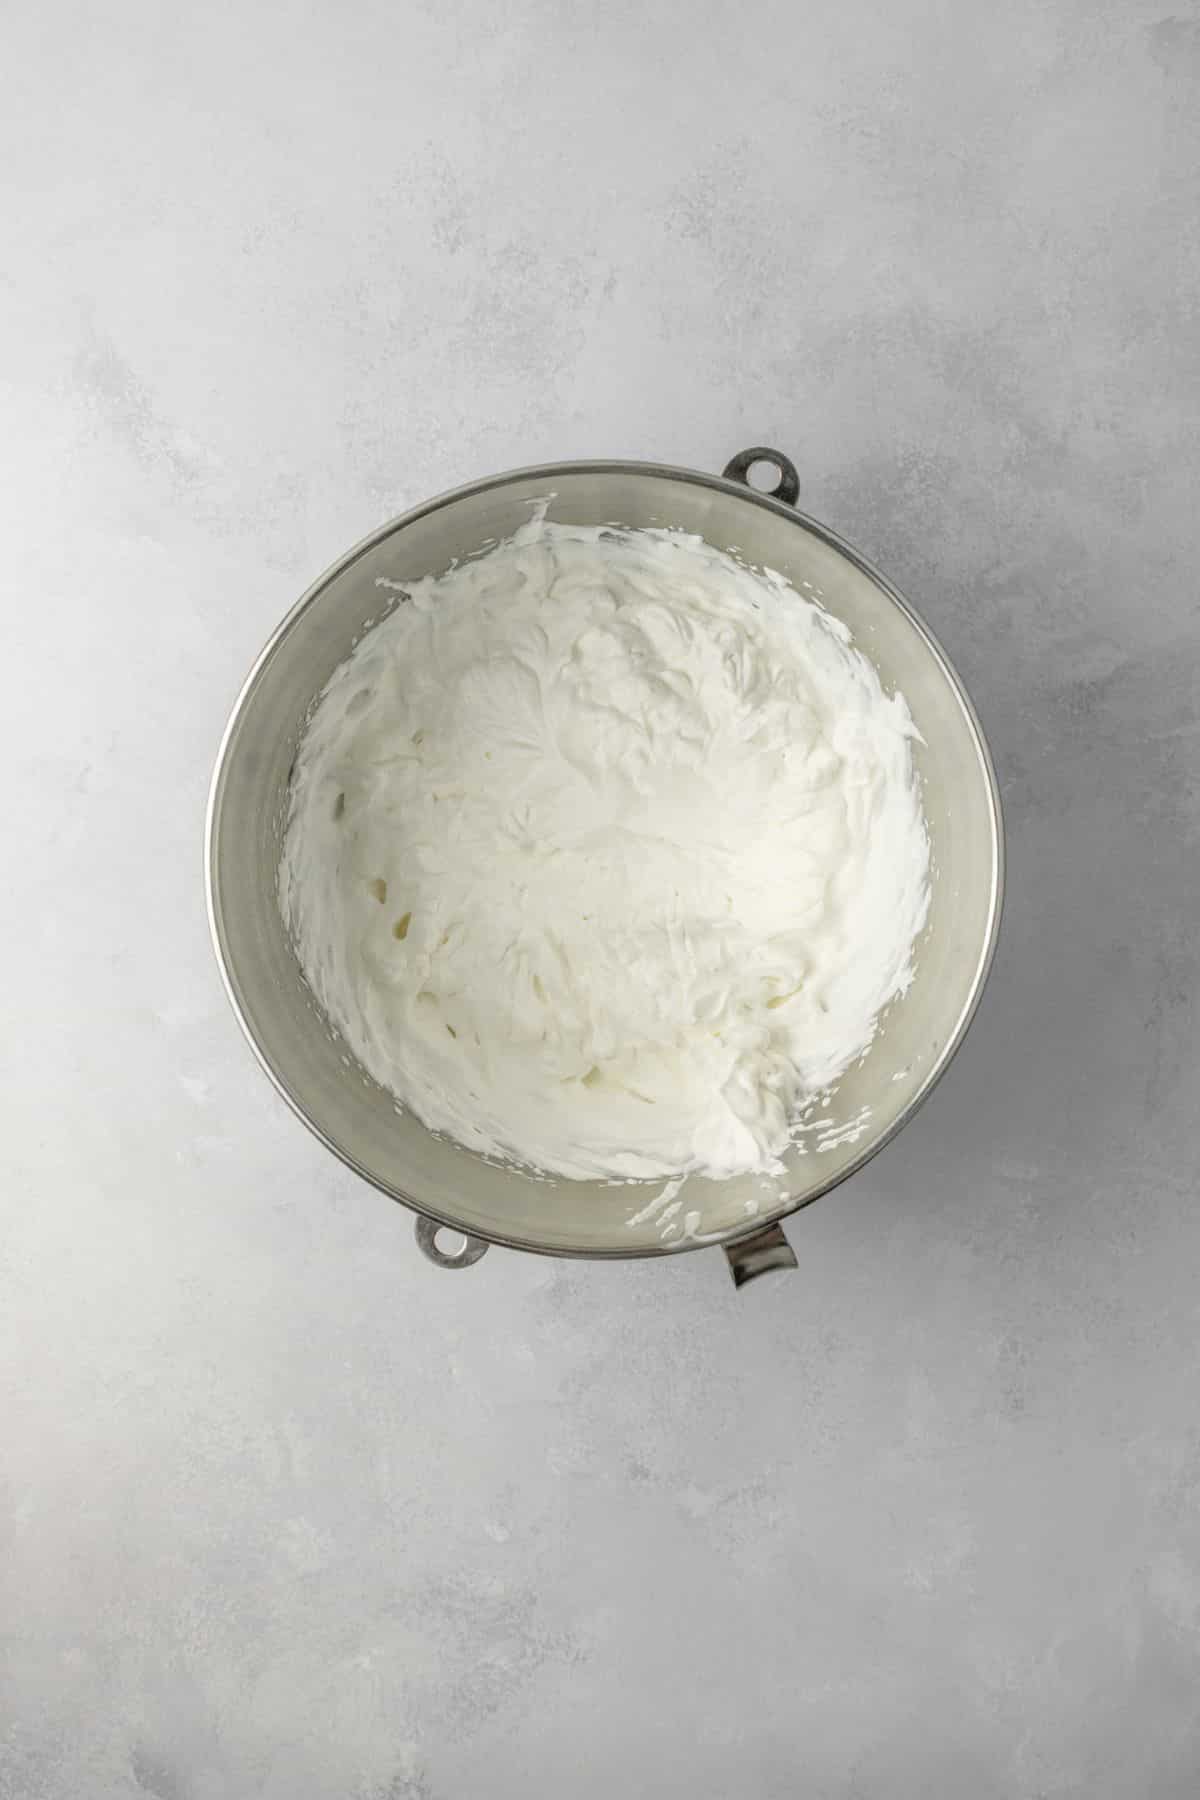 Whipped cream in a stainless steel bowl.